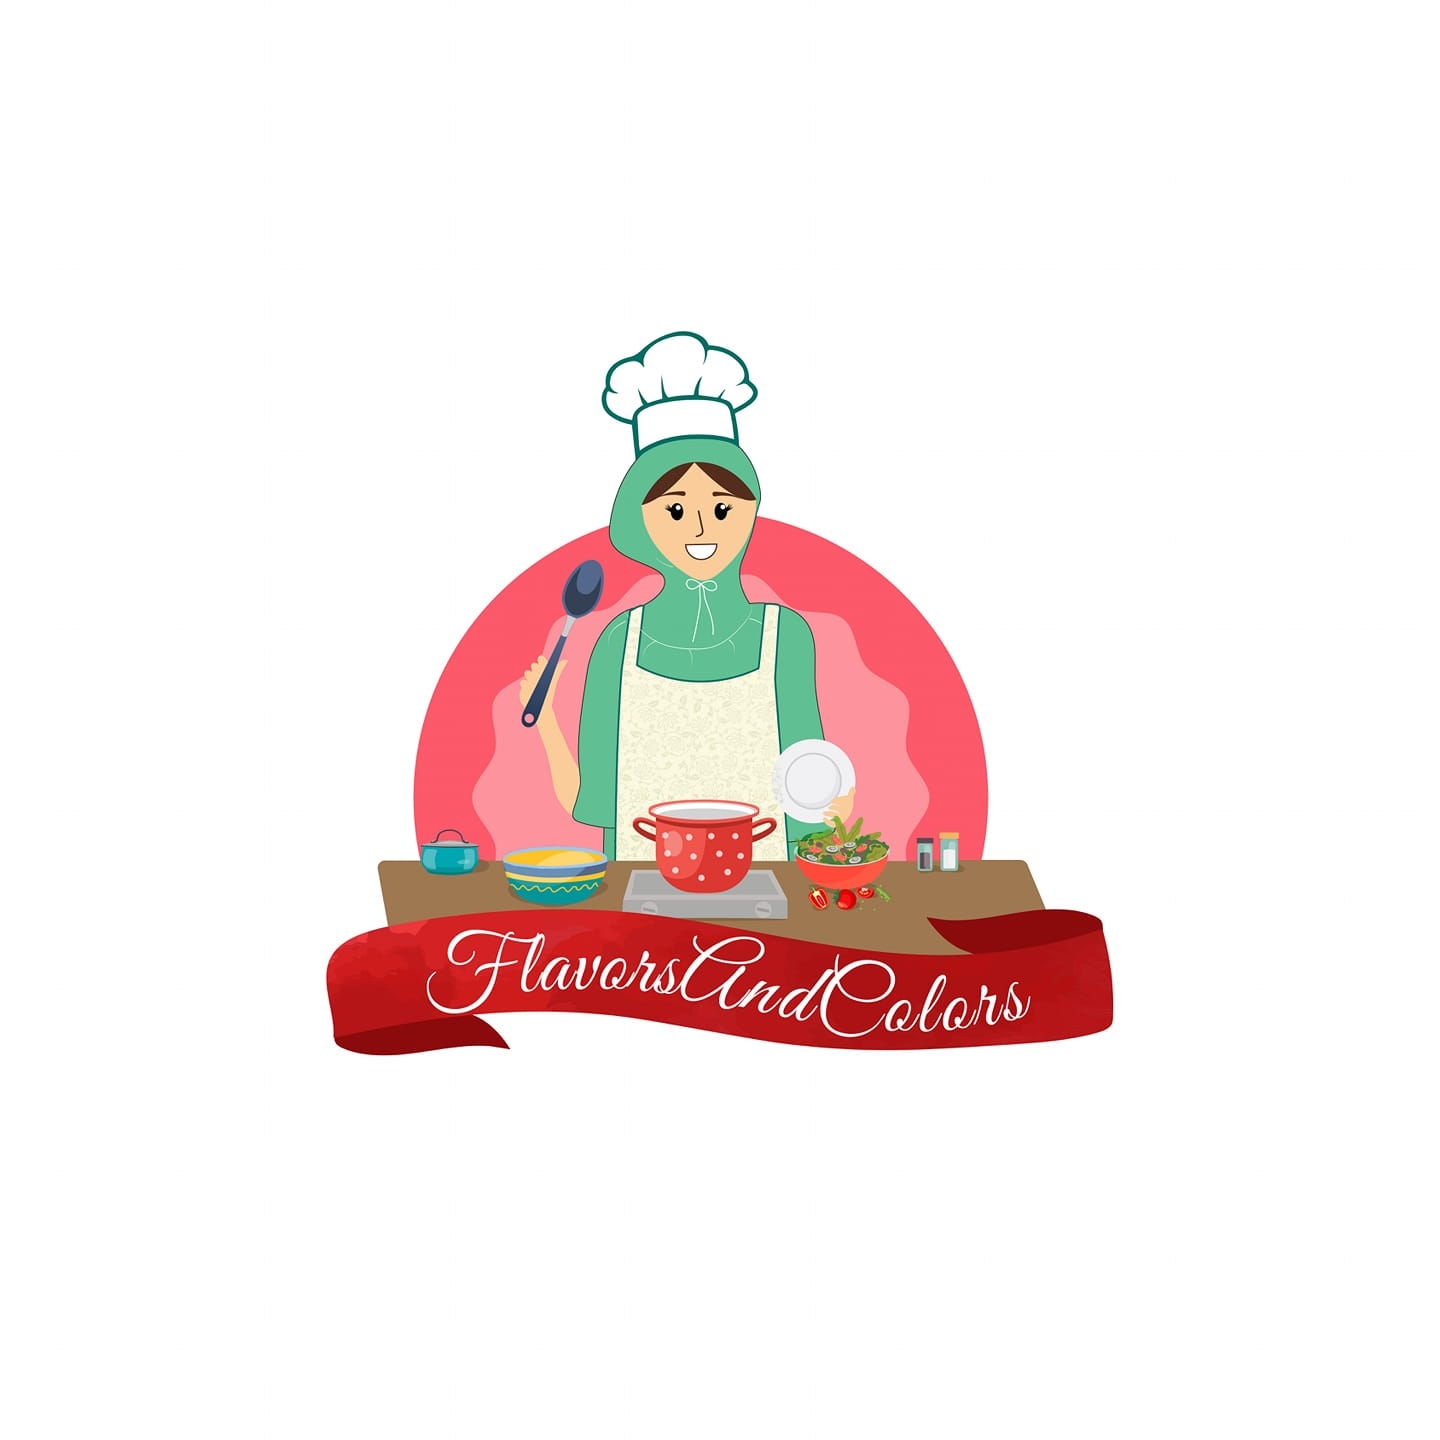 Catering Services Logo